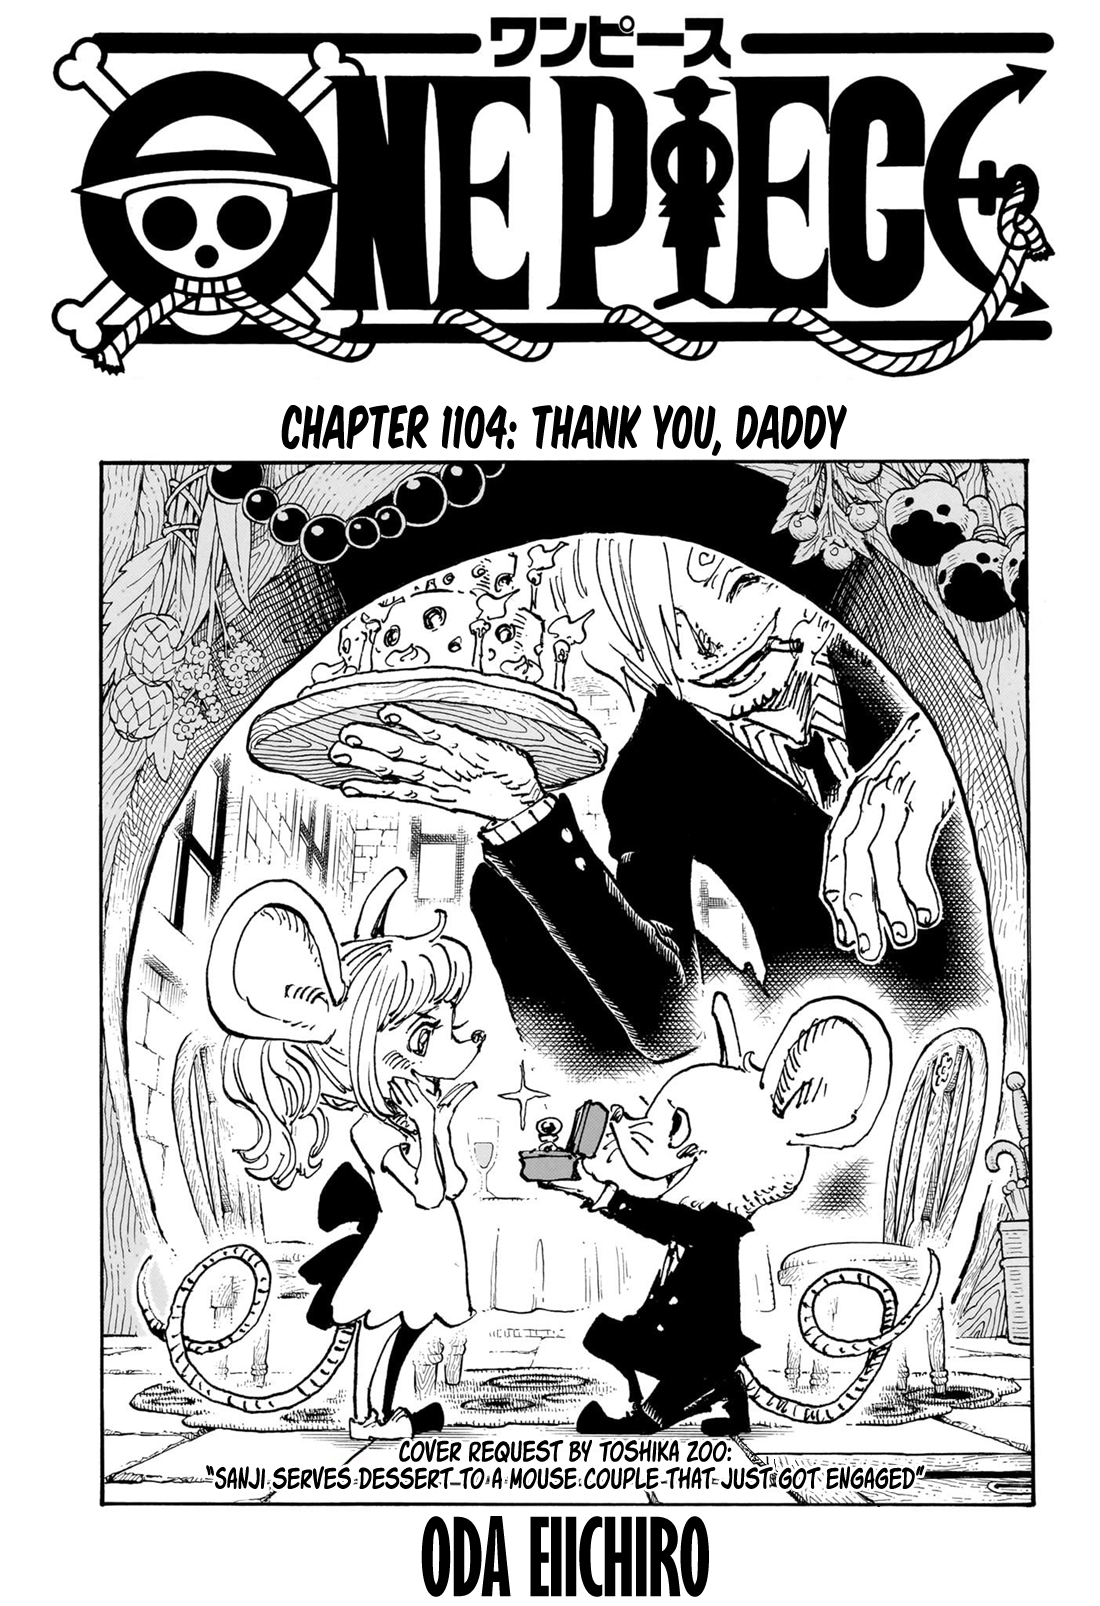 One Piece, Chapter 1082  TcbScans Org - Free Manga Online in High Quality